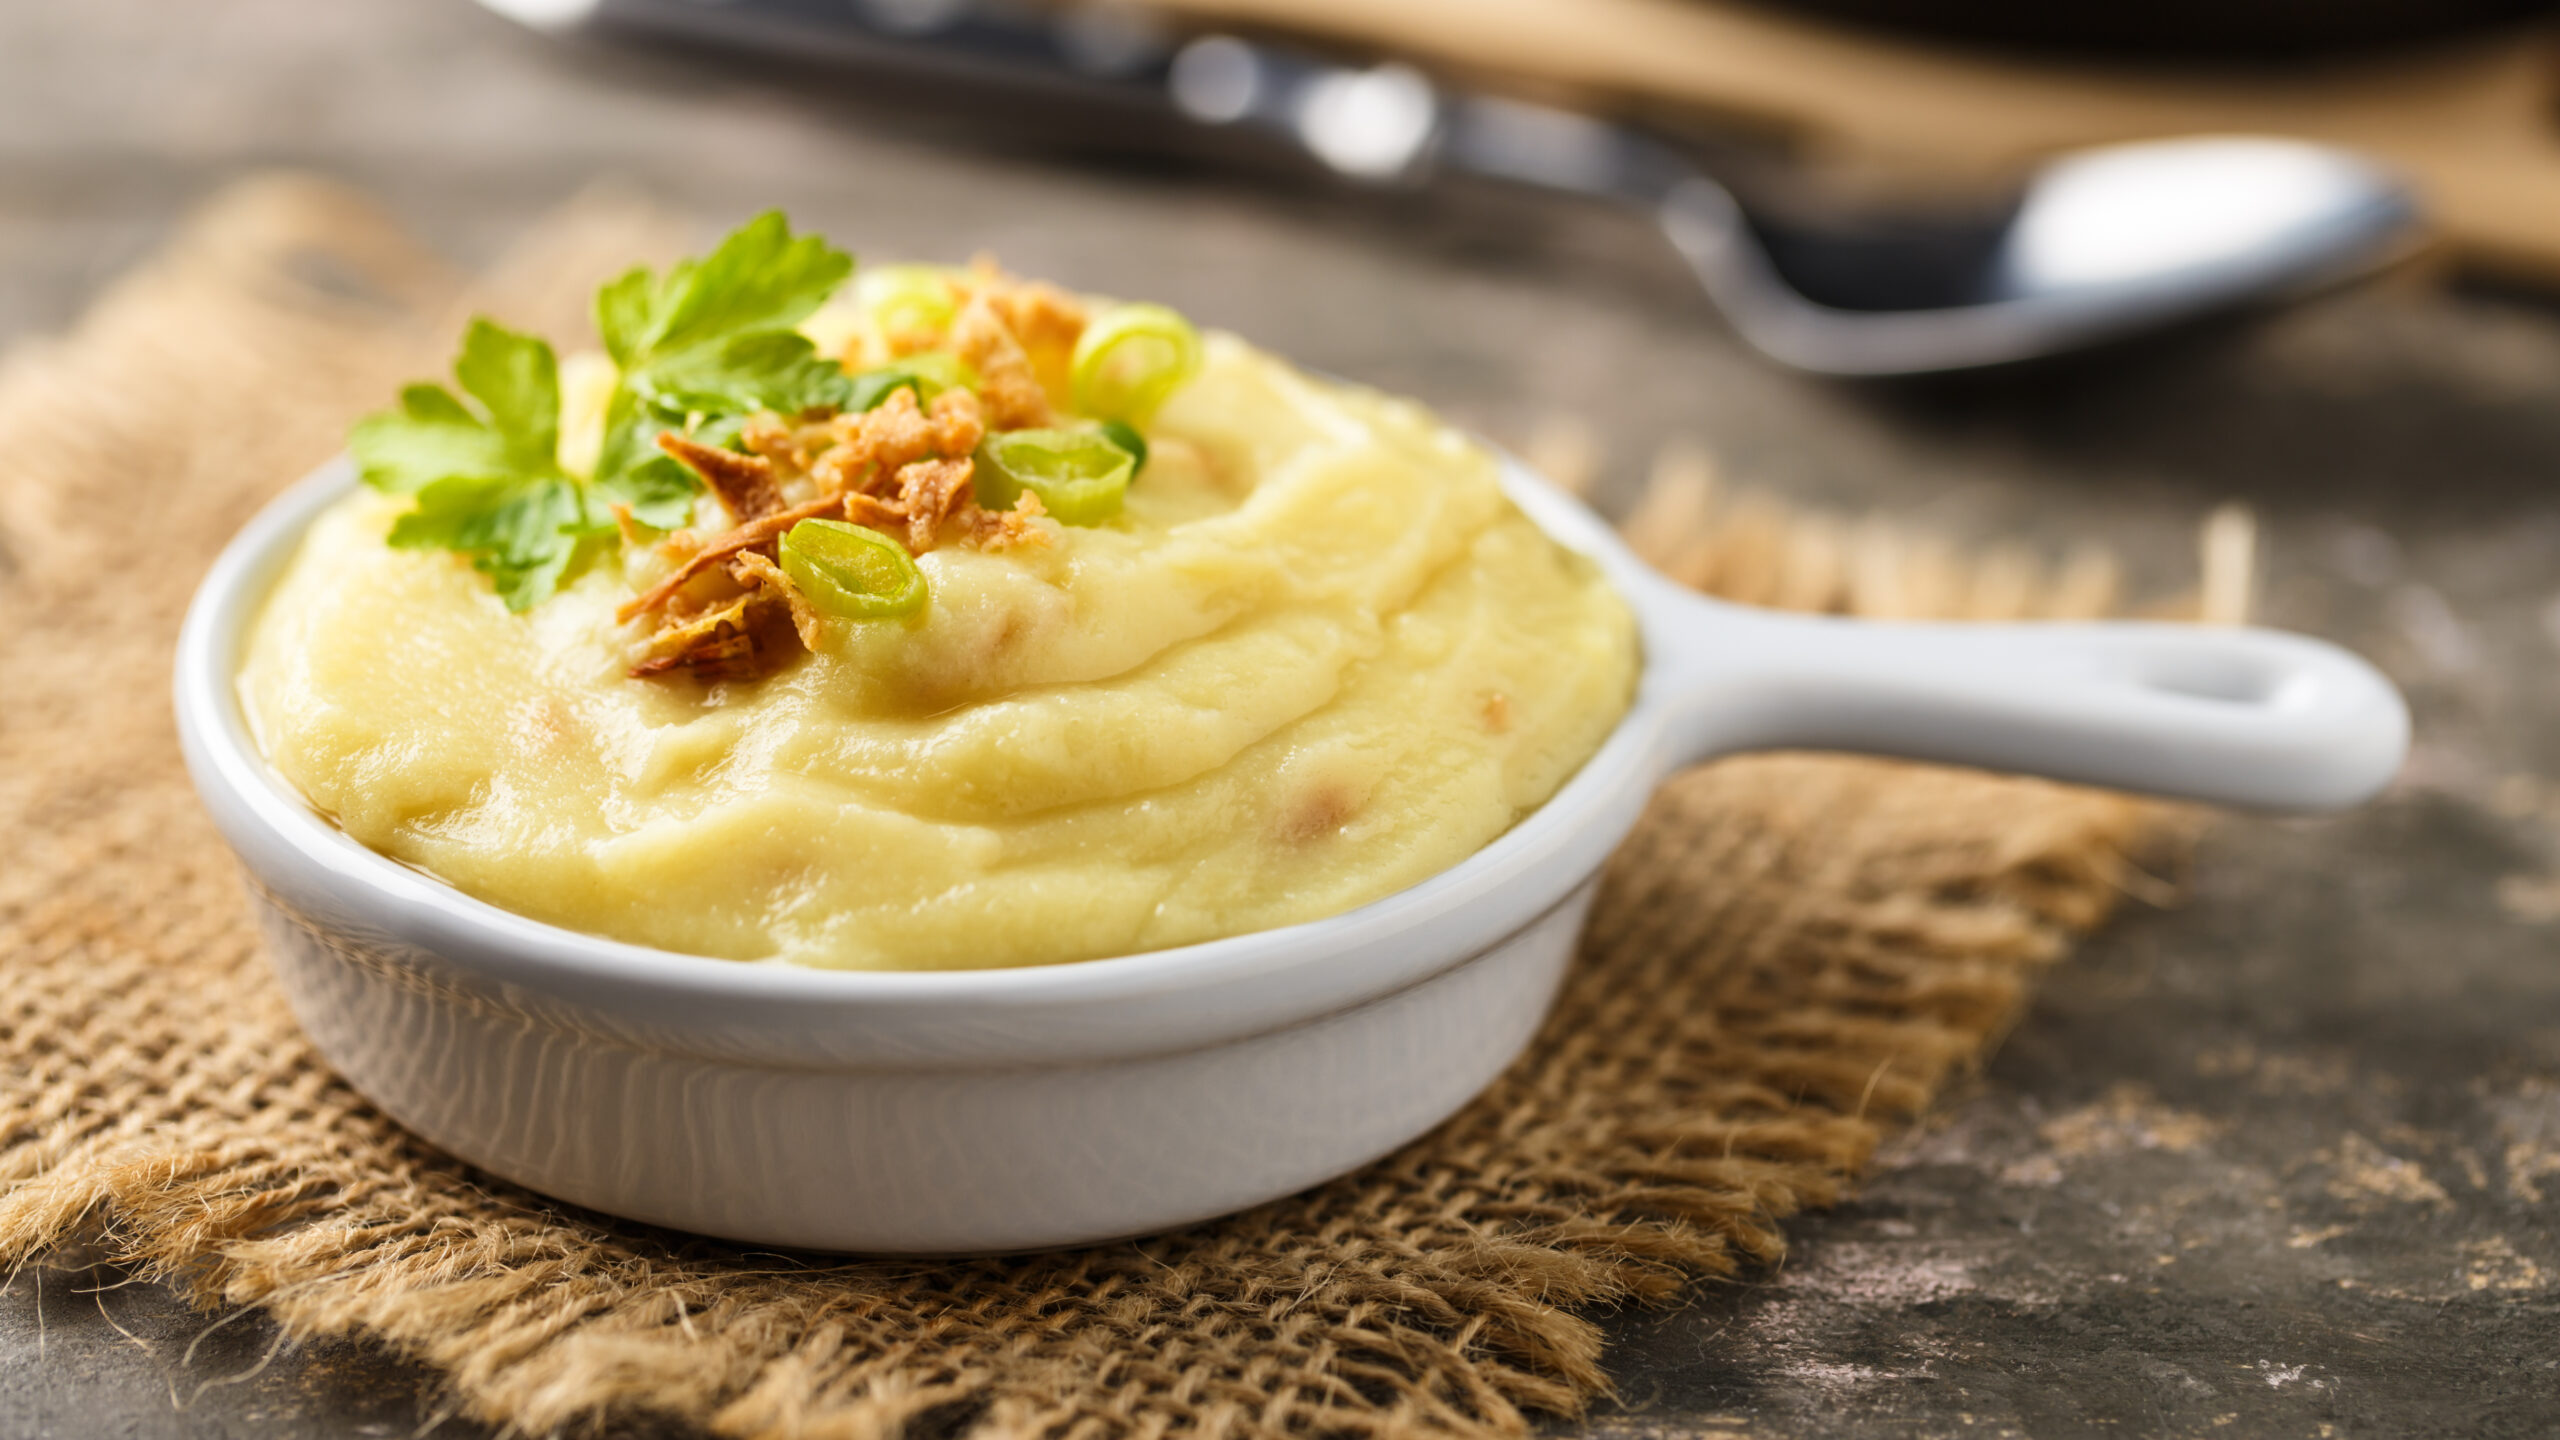 Garlic mashed potatoes, a simple way to add extra flavor to this classic side dish.